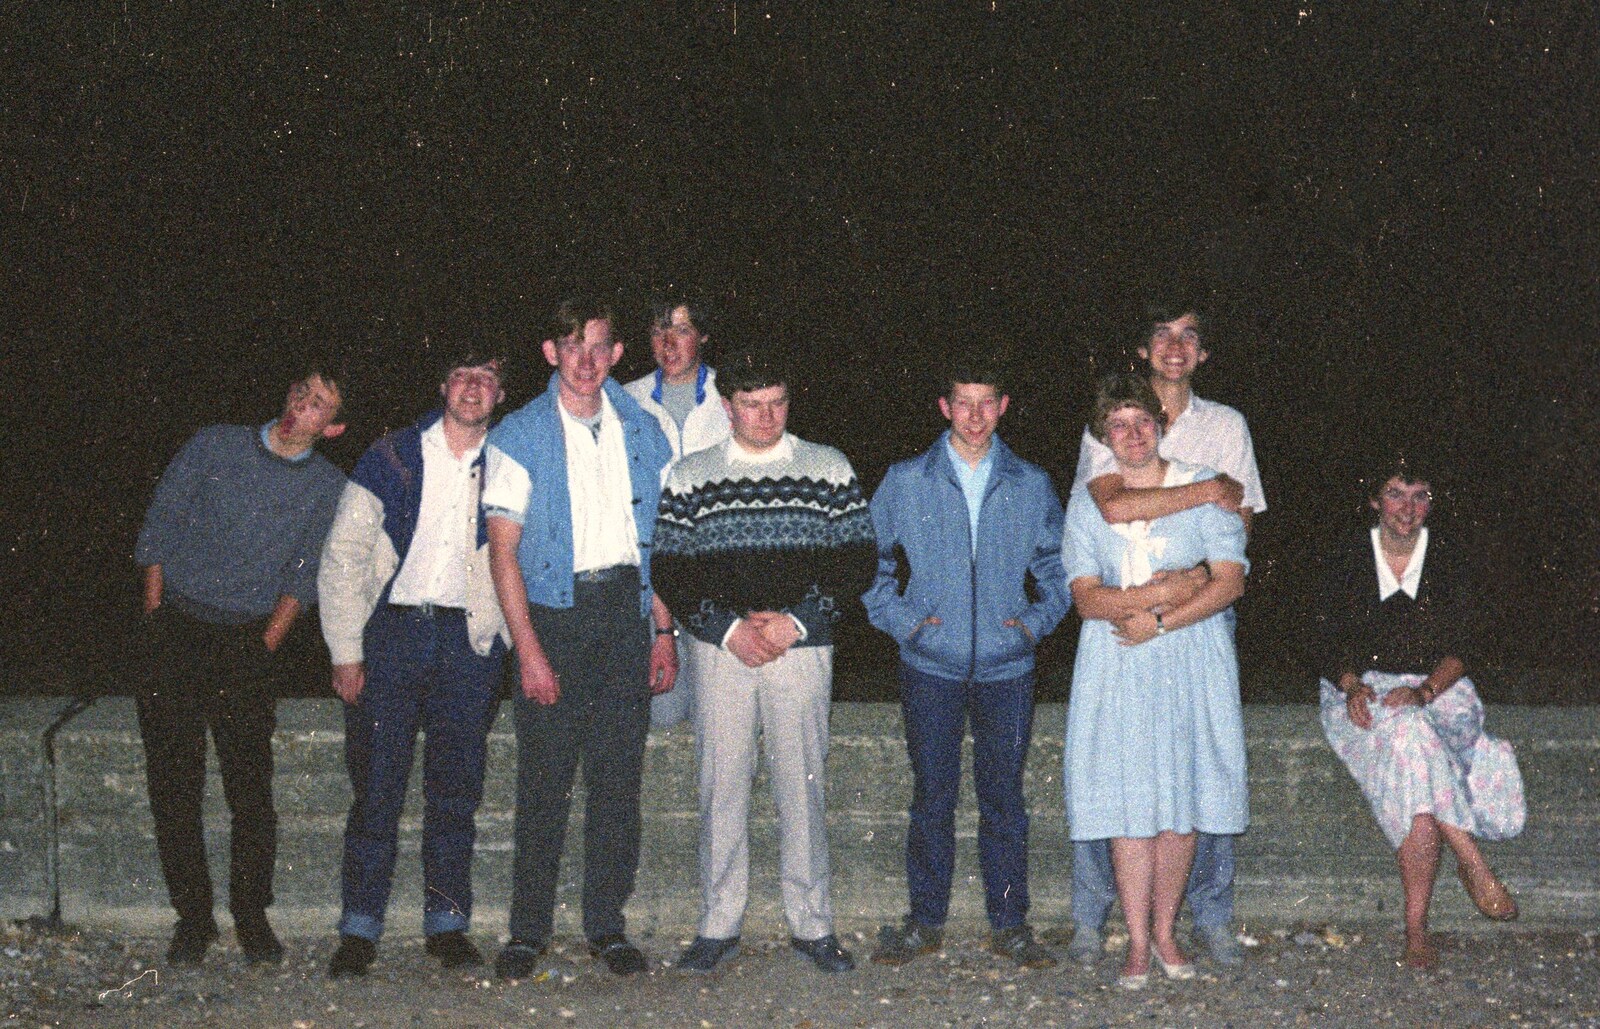 It's Kevin's birthday at Mudeford from Brockenhurst College Exams and Miscellany, Barton on Sea, Hampshire - 10th June 1985